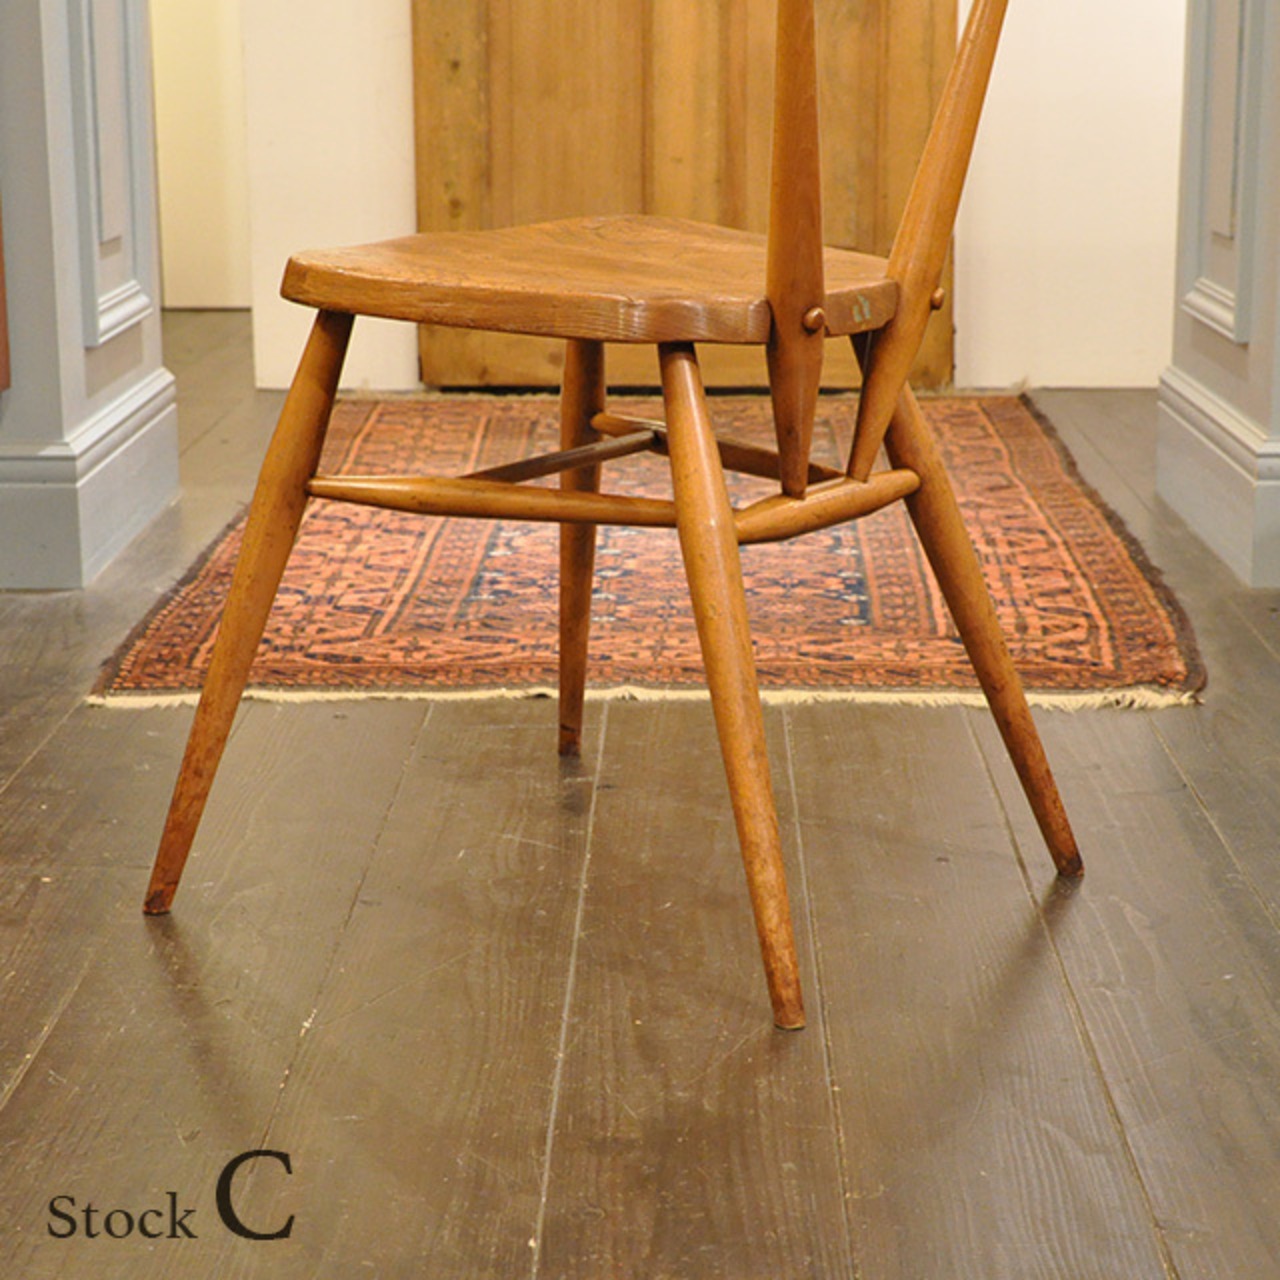 Ercol Stacking Chair 【C】/ アーコール スタッキング チェア / 2005B-001C